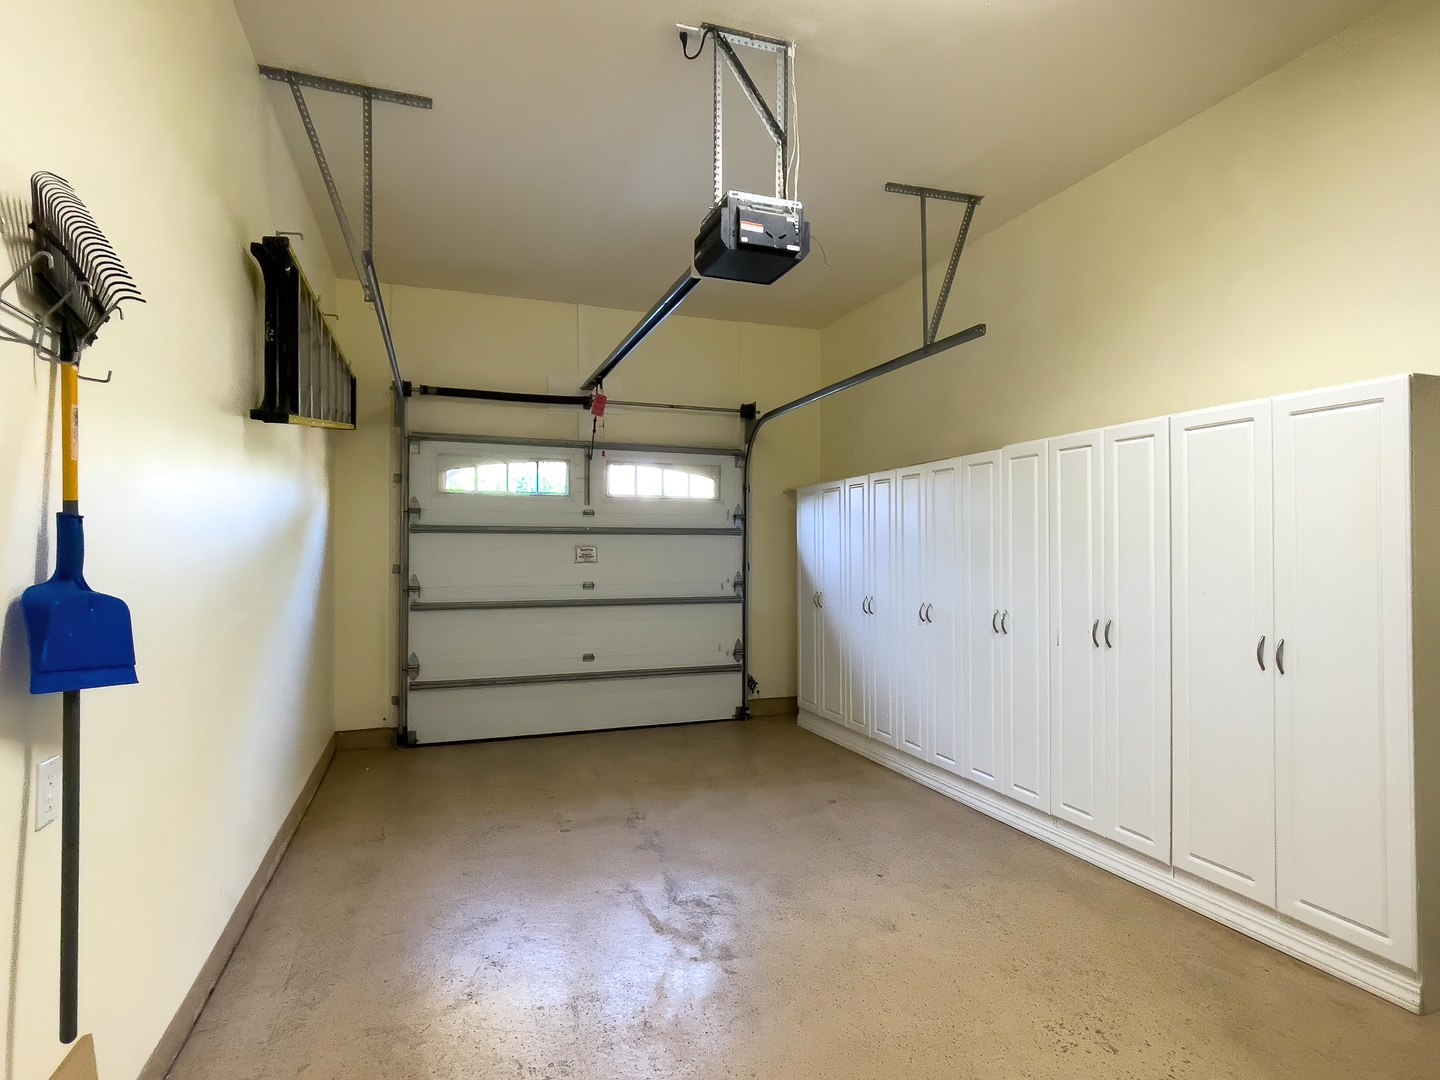 Kamuela Vacation Rentals, Mauna Lani Fairways #204 - Private Garage Connected to Laundry Room